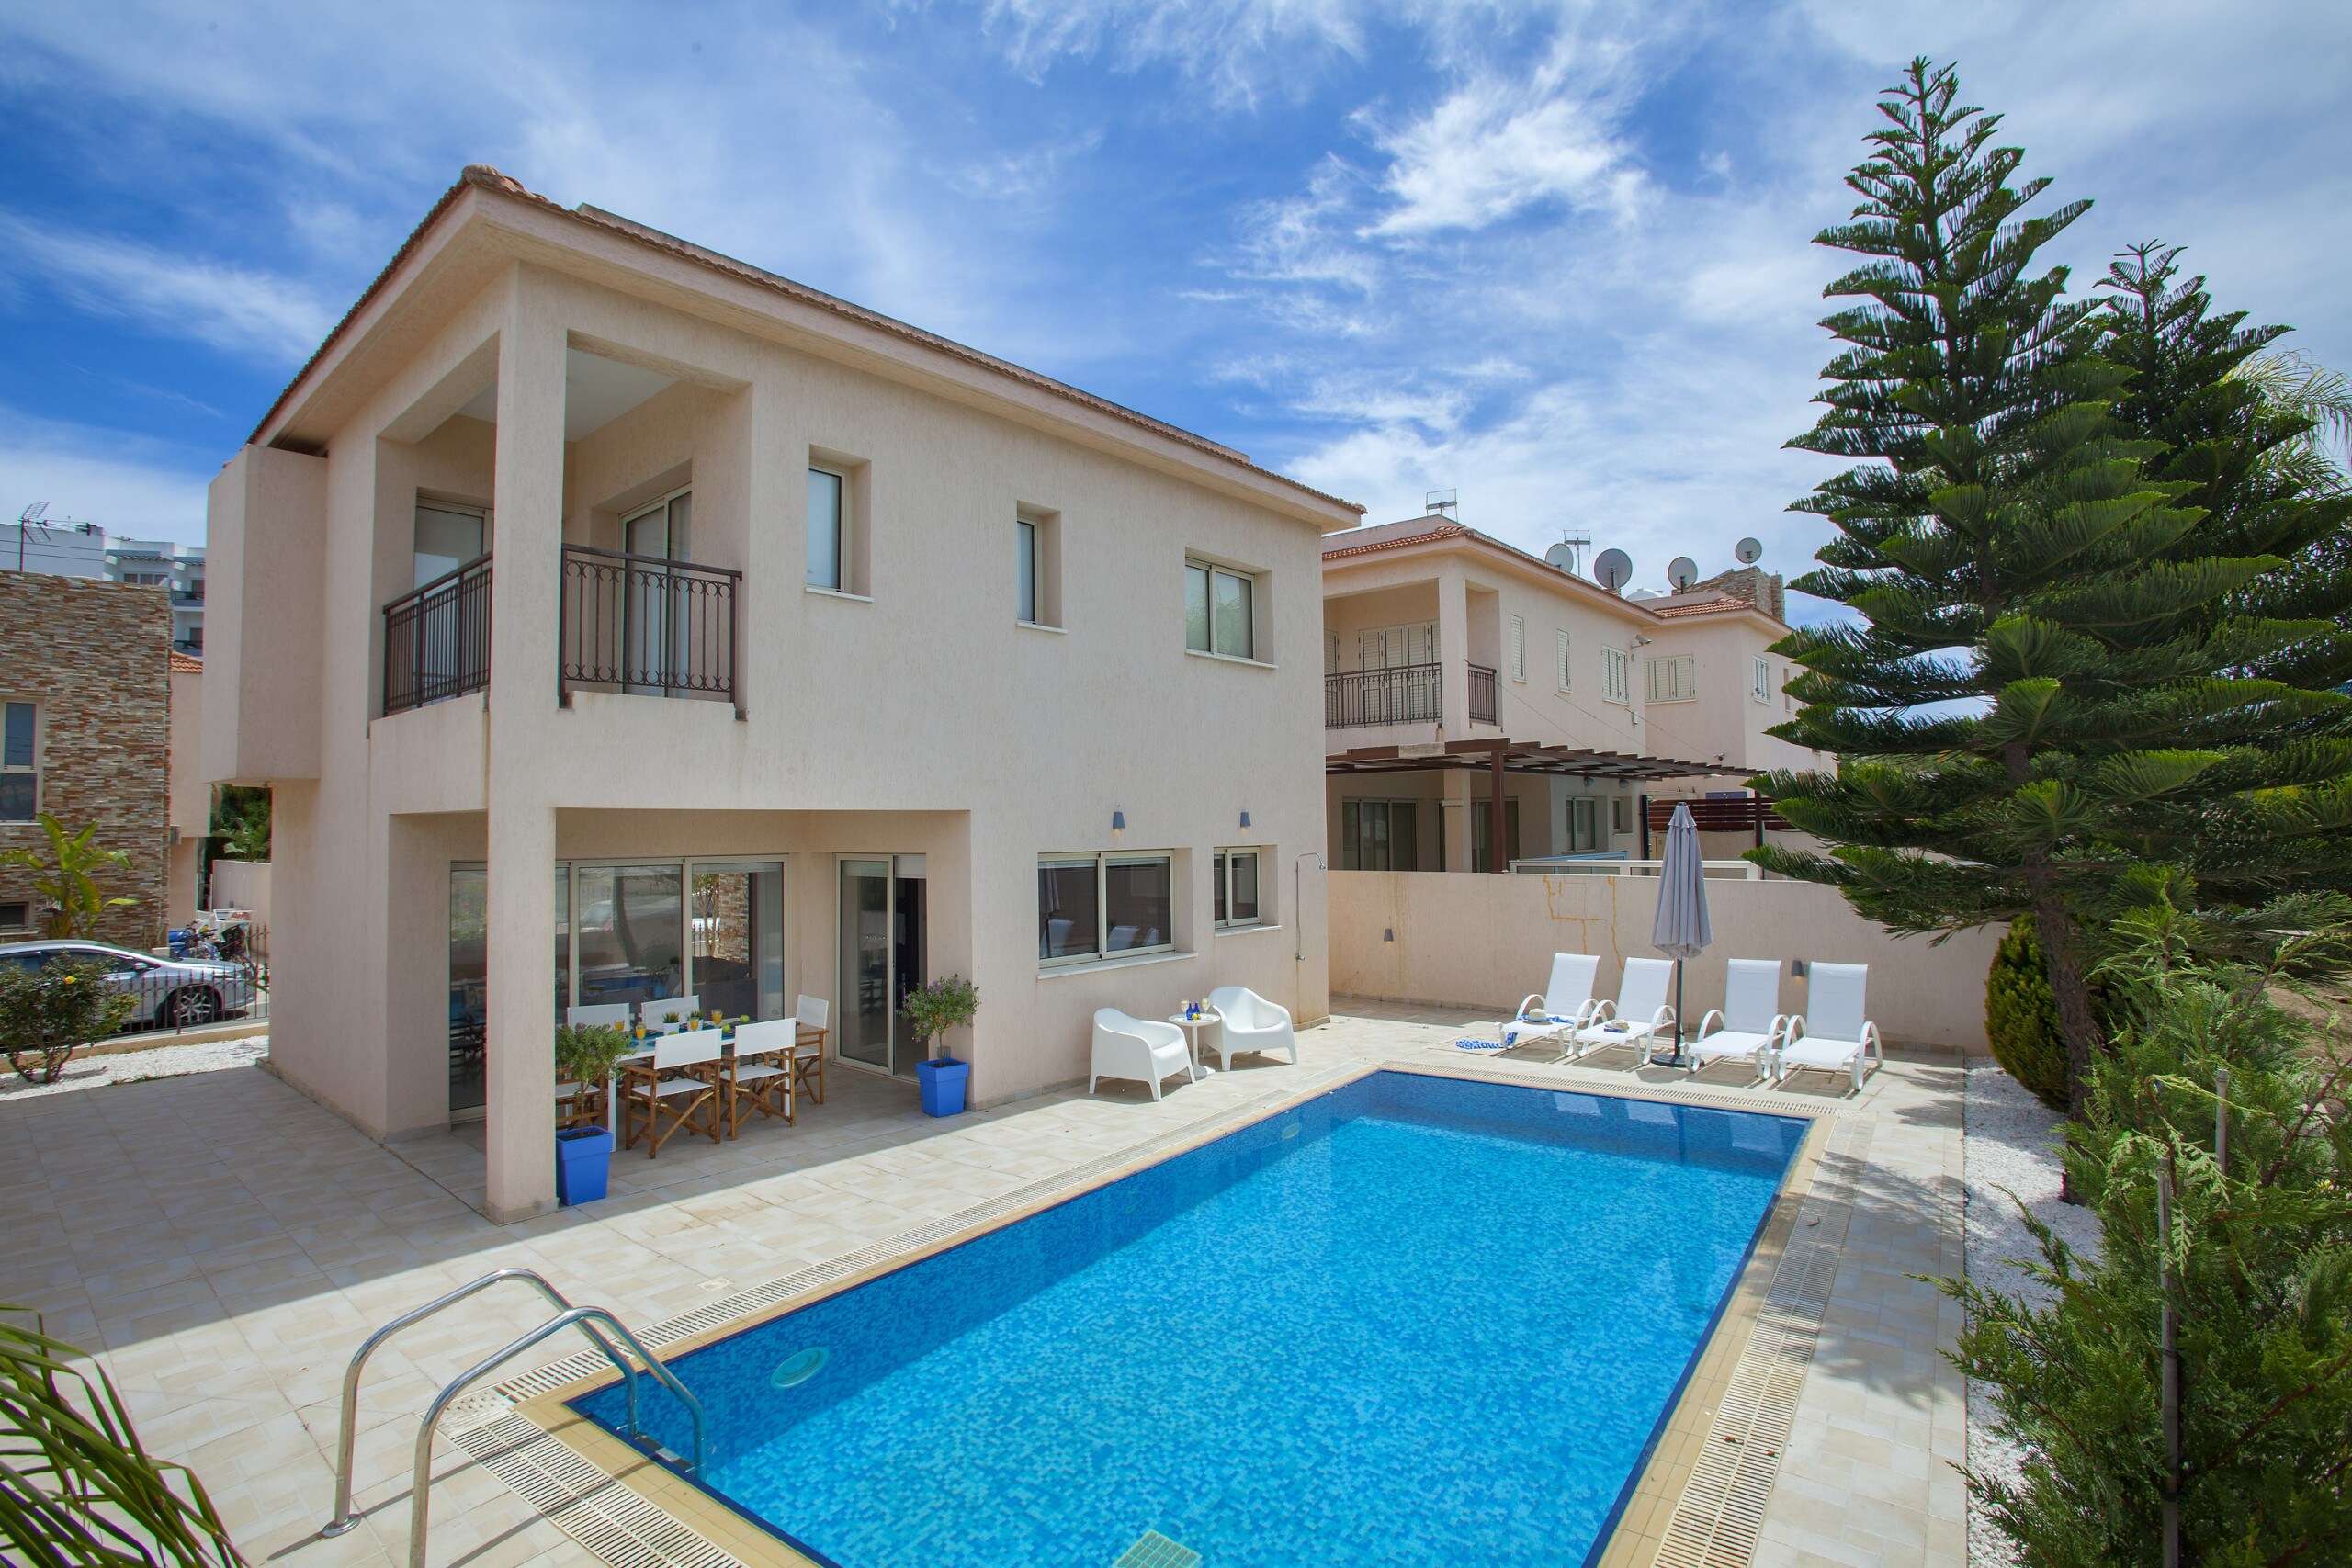 Property Image 2 - Superior Villa with Pool near the Beach and Shops